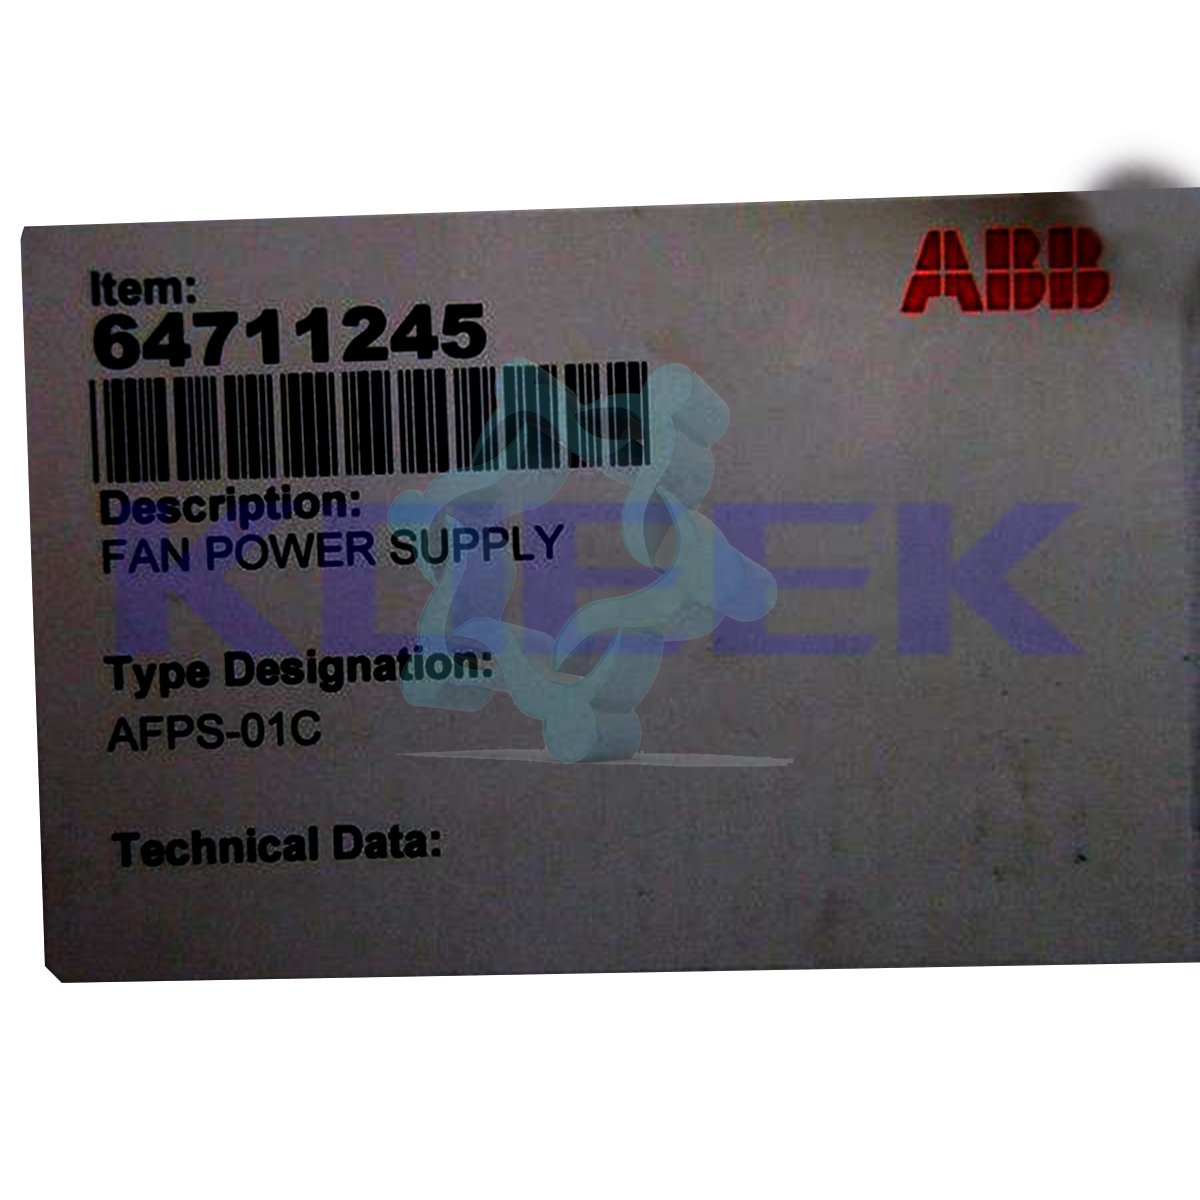 AFPS-01C KOEED 500+, ABB, import_2020_10_10_031751, NEW, Other